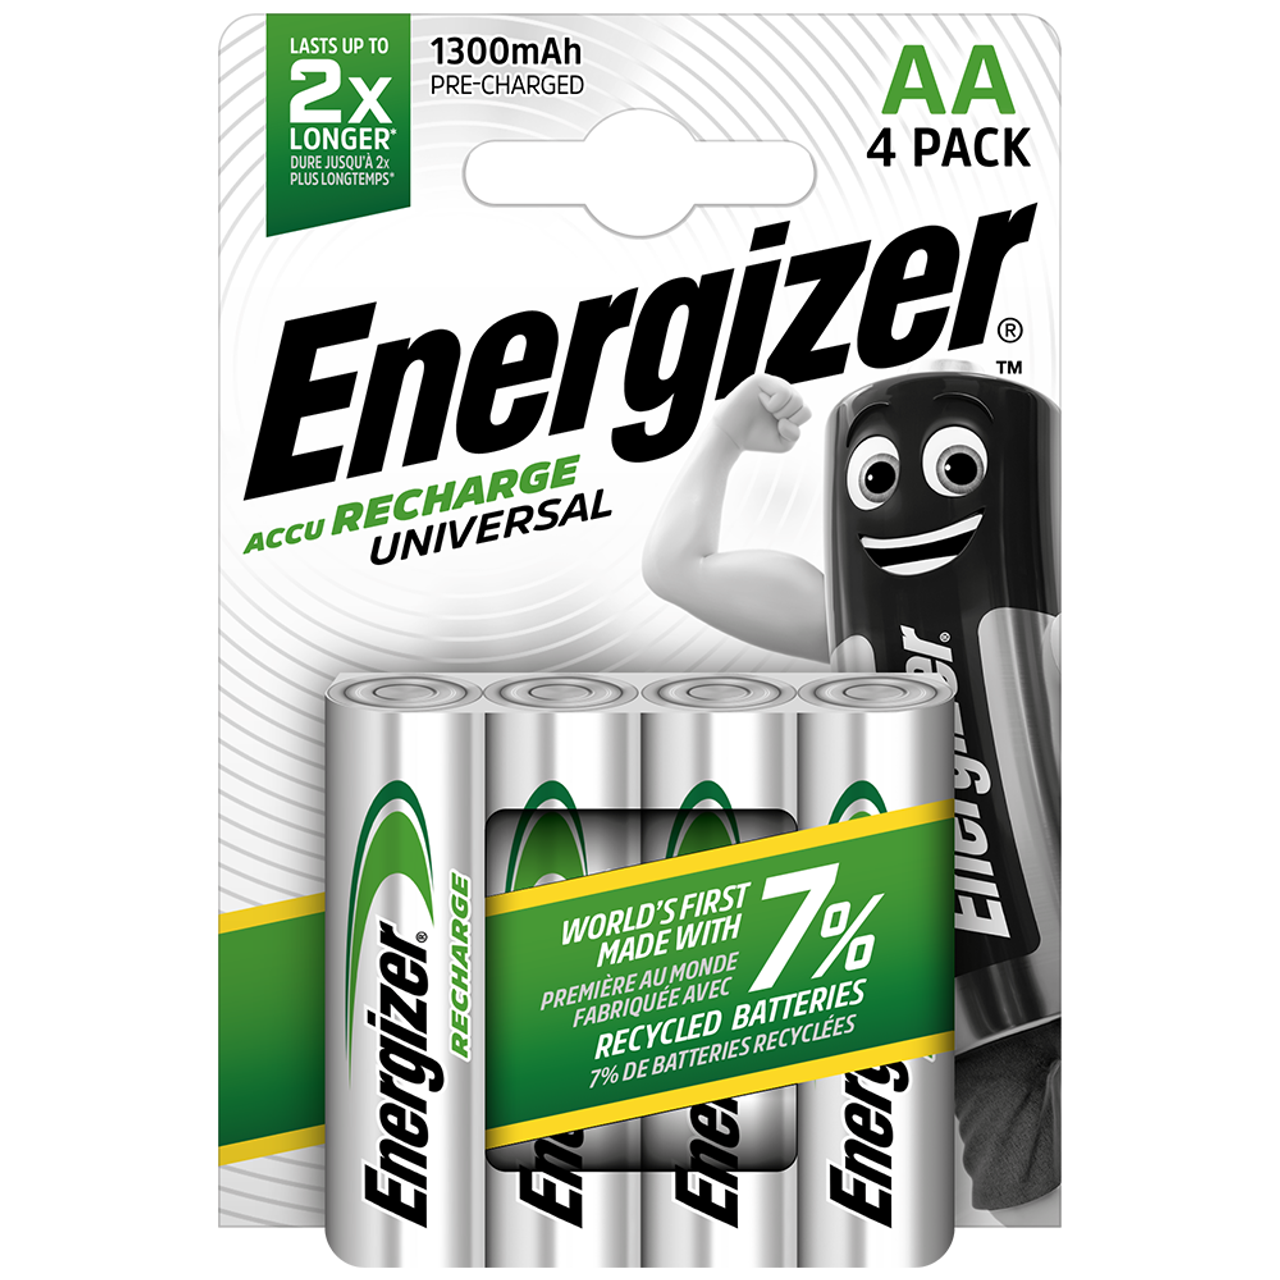 Energizer Universal AA 1300mAh Rechargeable Batteries (4 Pack)